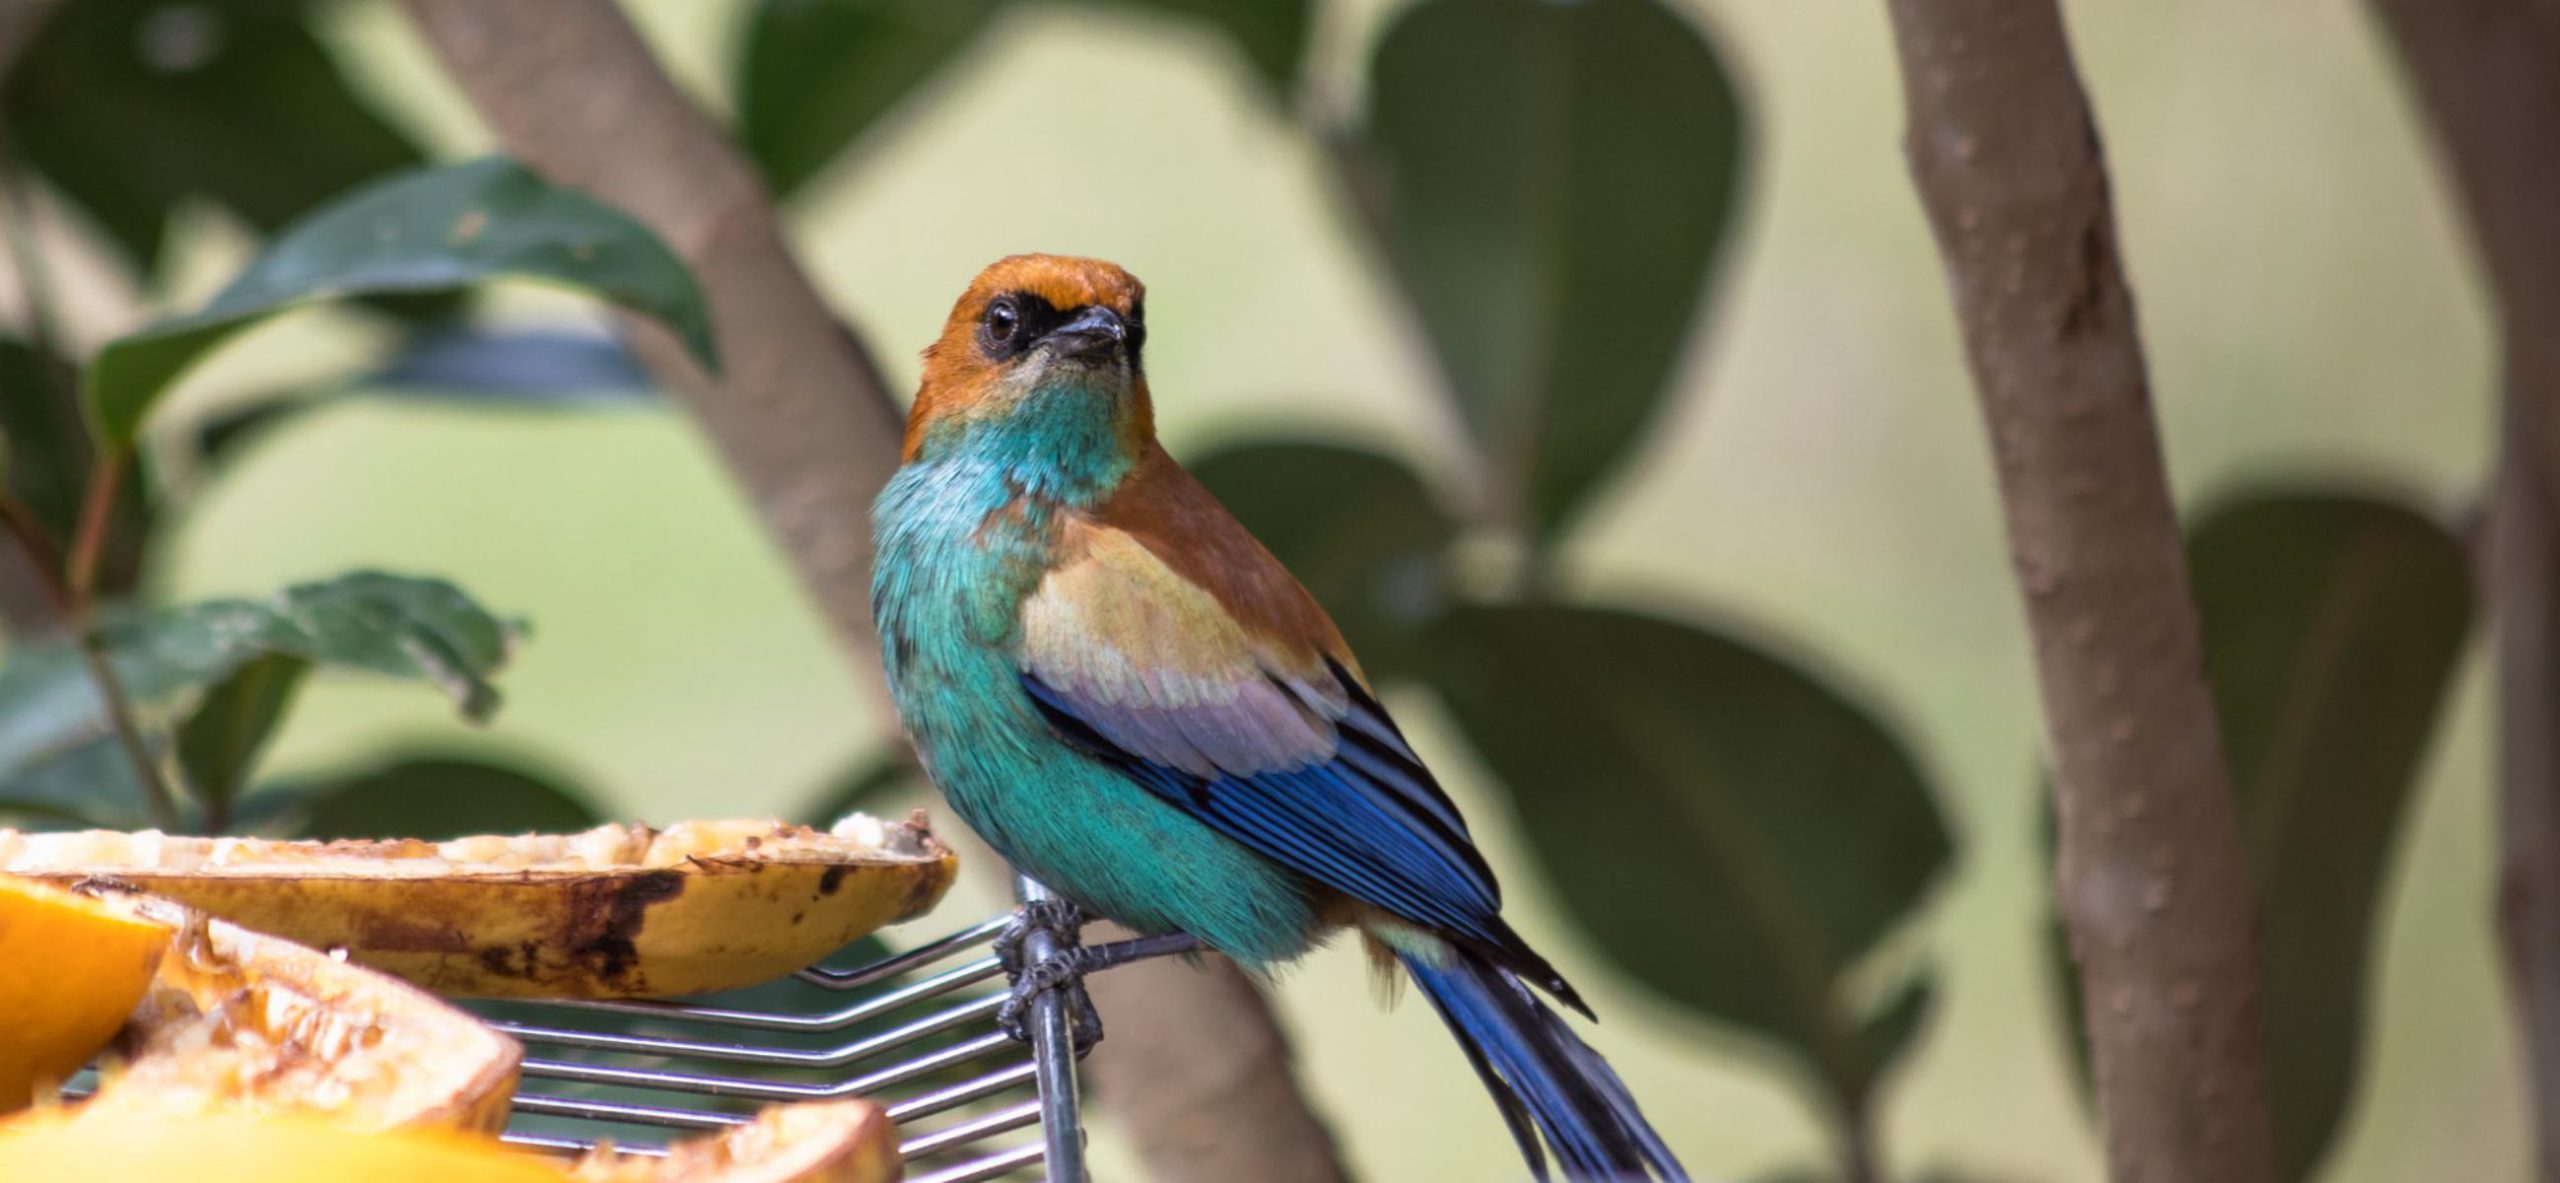 20230808124240 fpdl.in closeup chestnut backed tanager bird standing cooling rack 181624 51082 full scaled